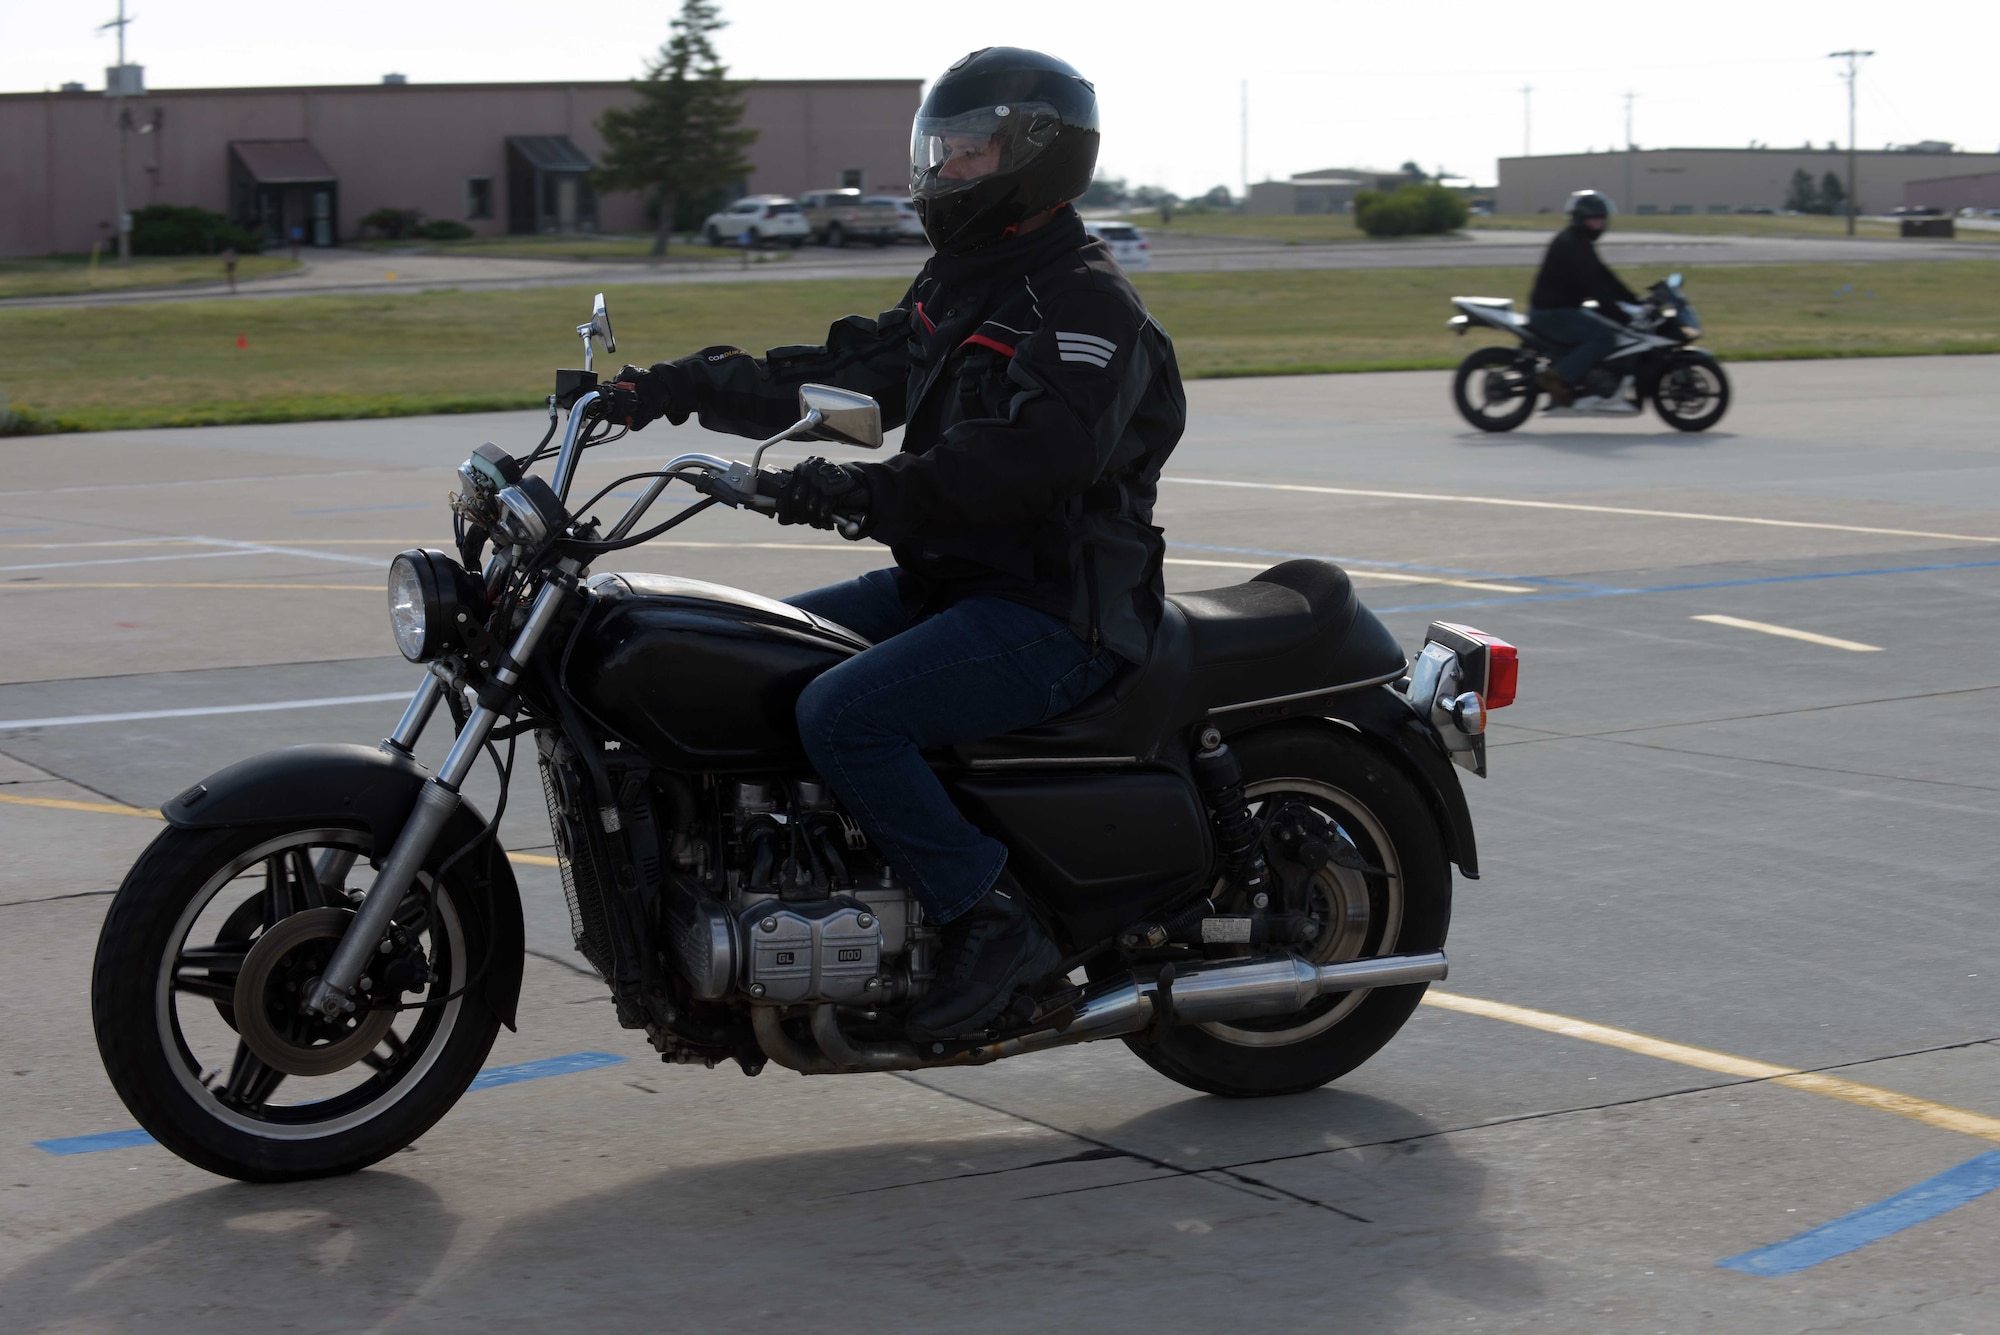 Airmen Assigned to the 28th Bomb Wing performs motorcycle maneuver.